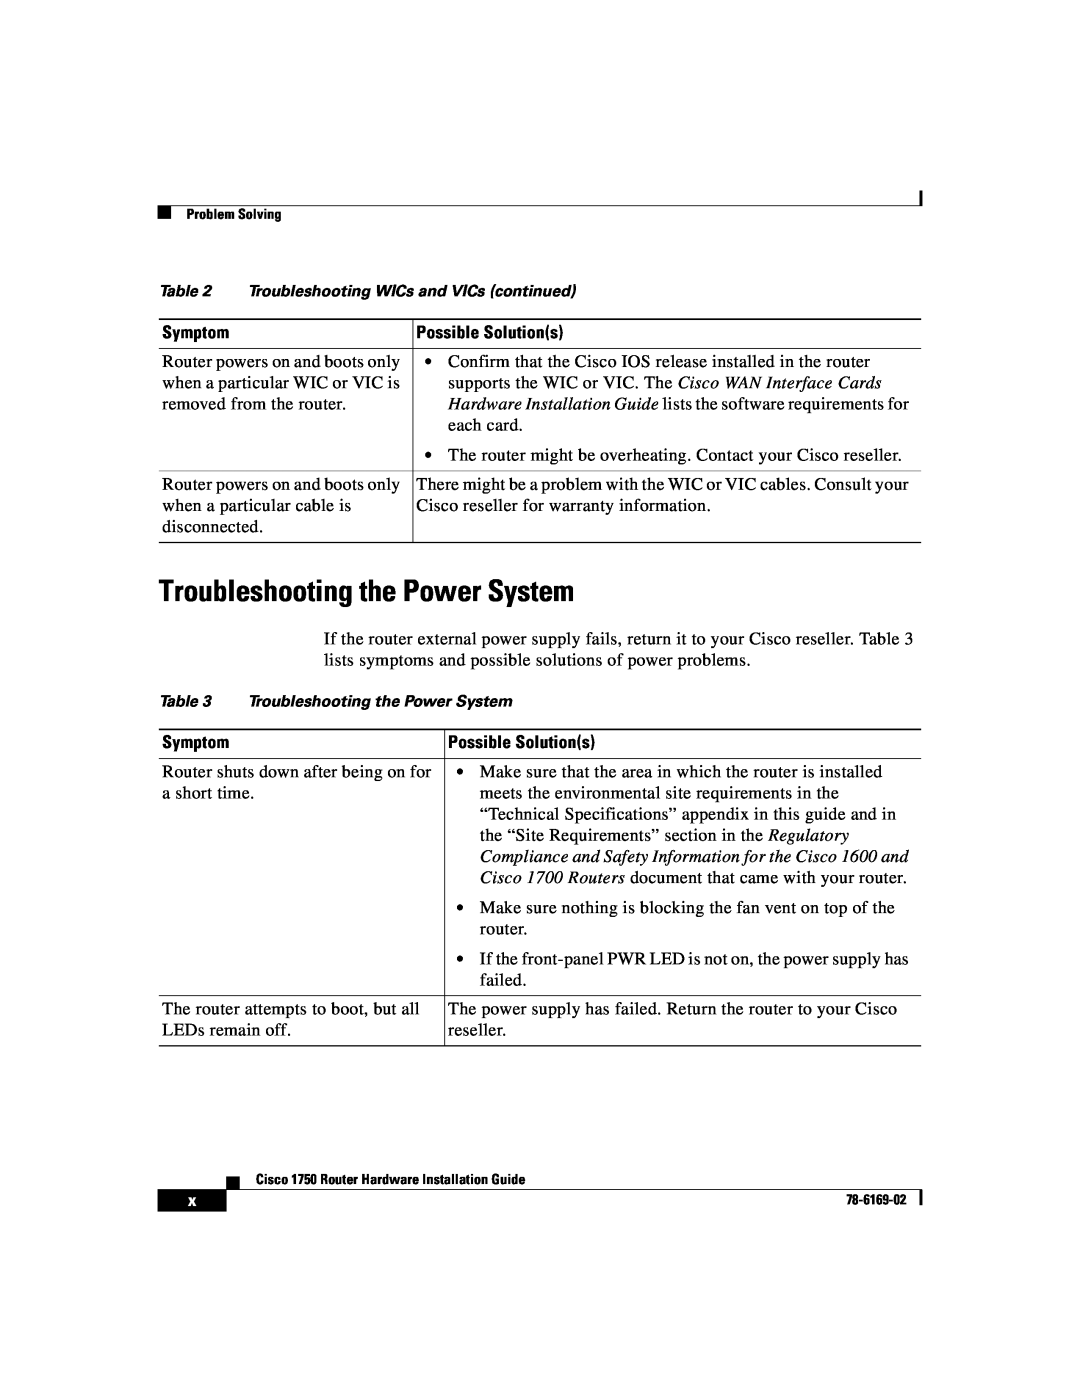 Cisco Systems CISCO1750 manual Troubleshooting the Power System, Compliance and Safety Information for the Cisco 1600 and 